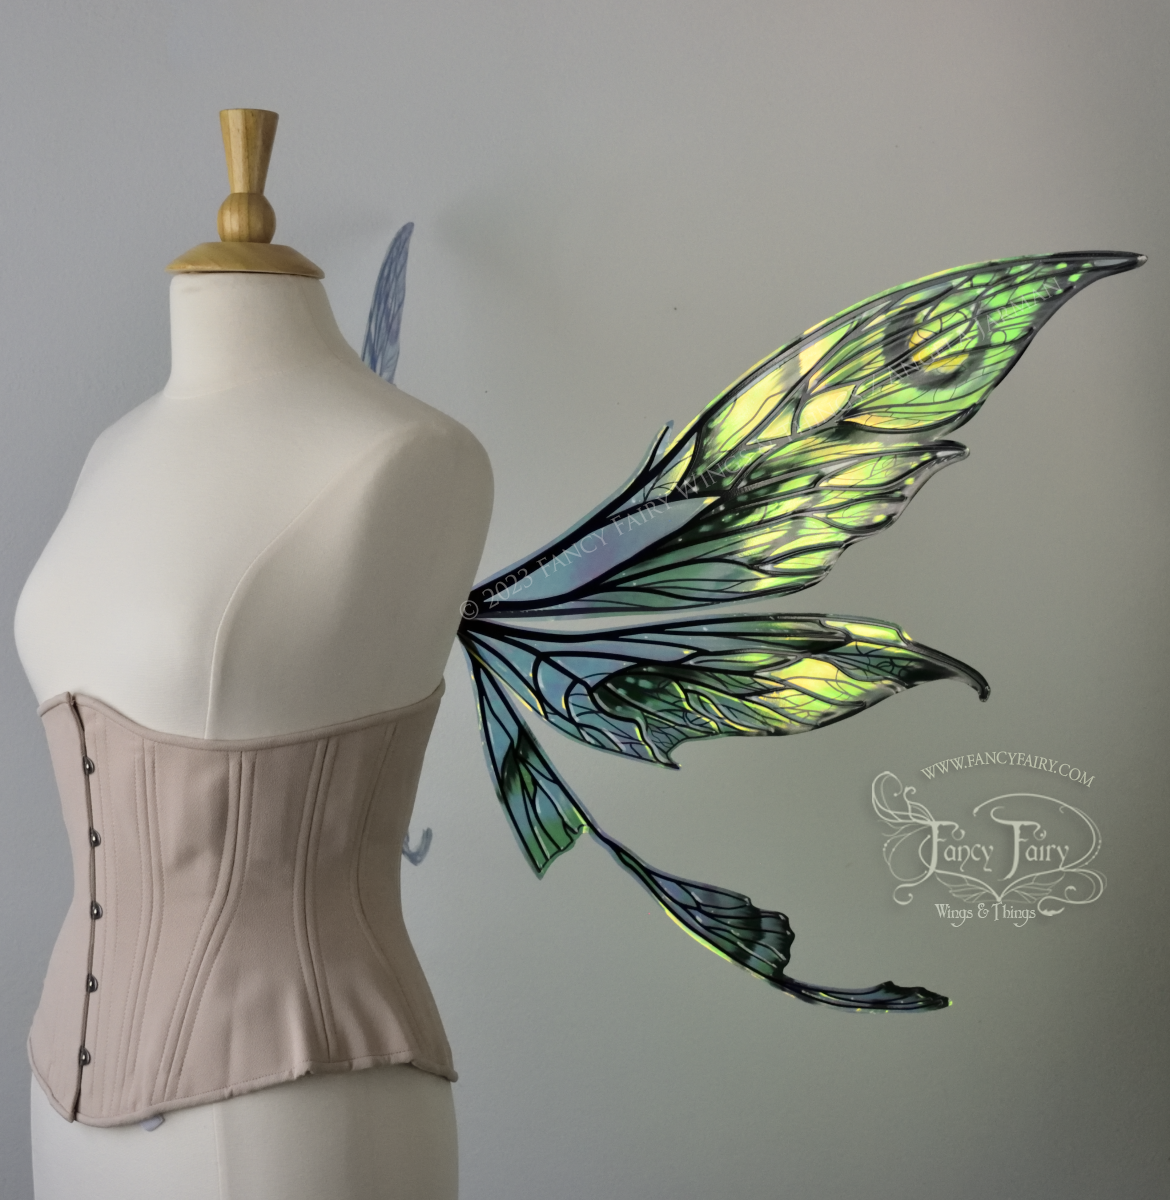 Right side view of large green, gold & black painted iridescent fairy wings with black veins. Upper panels are elongated with pointed tips, a ‘tail’, lots of vein detail